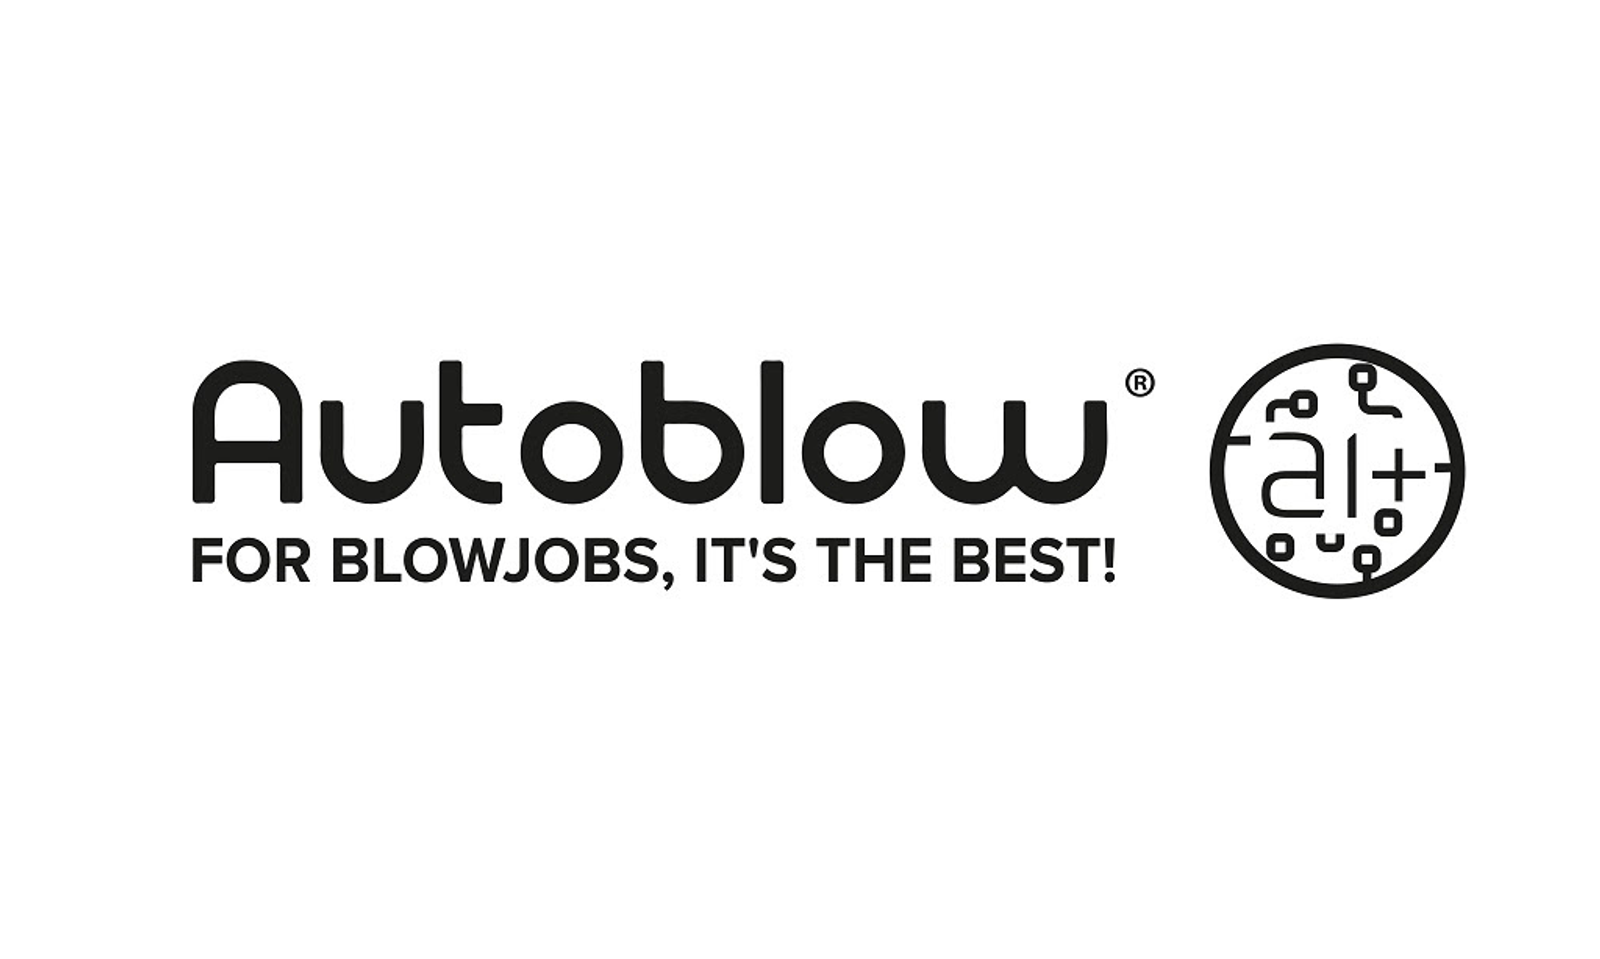 Autoblow AI+ Shares PSA Video to Protect Users